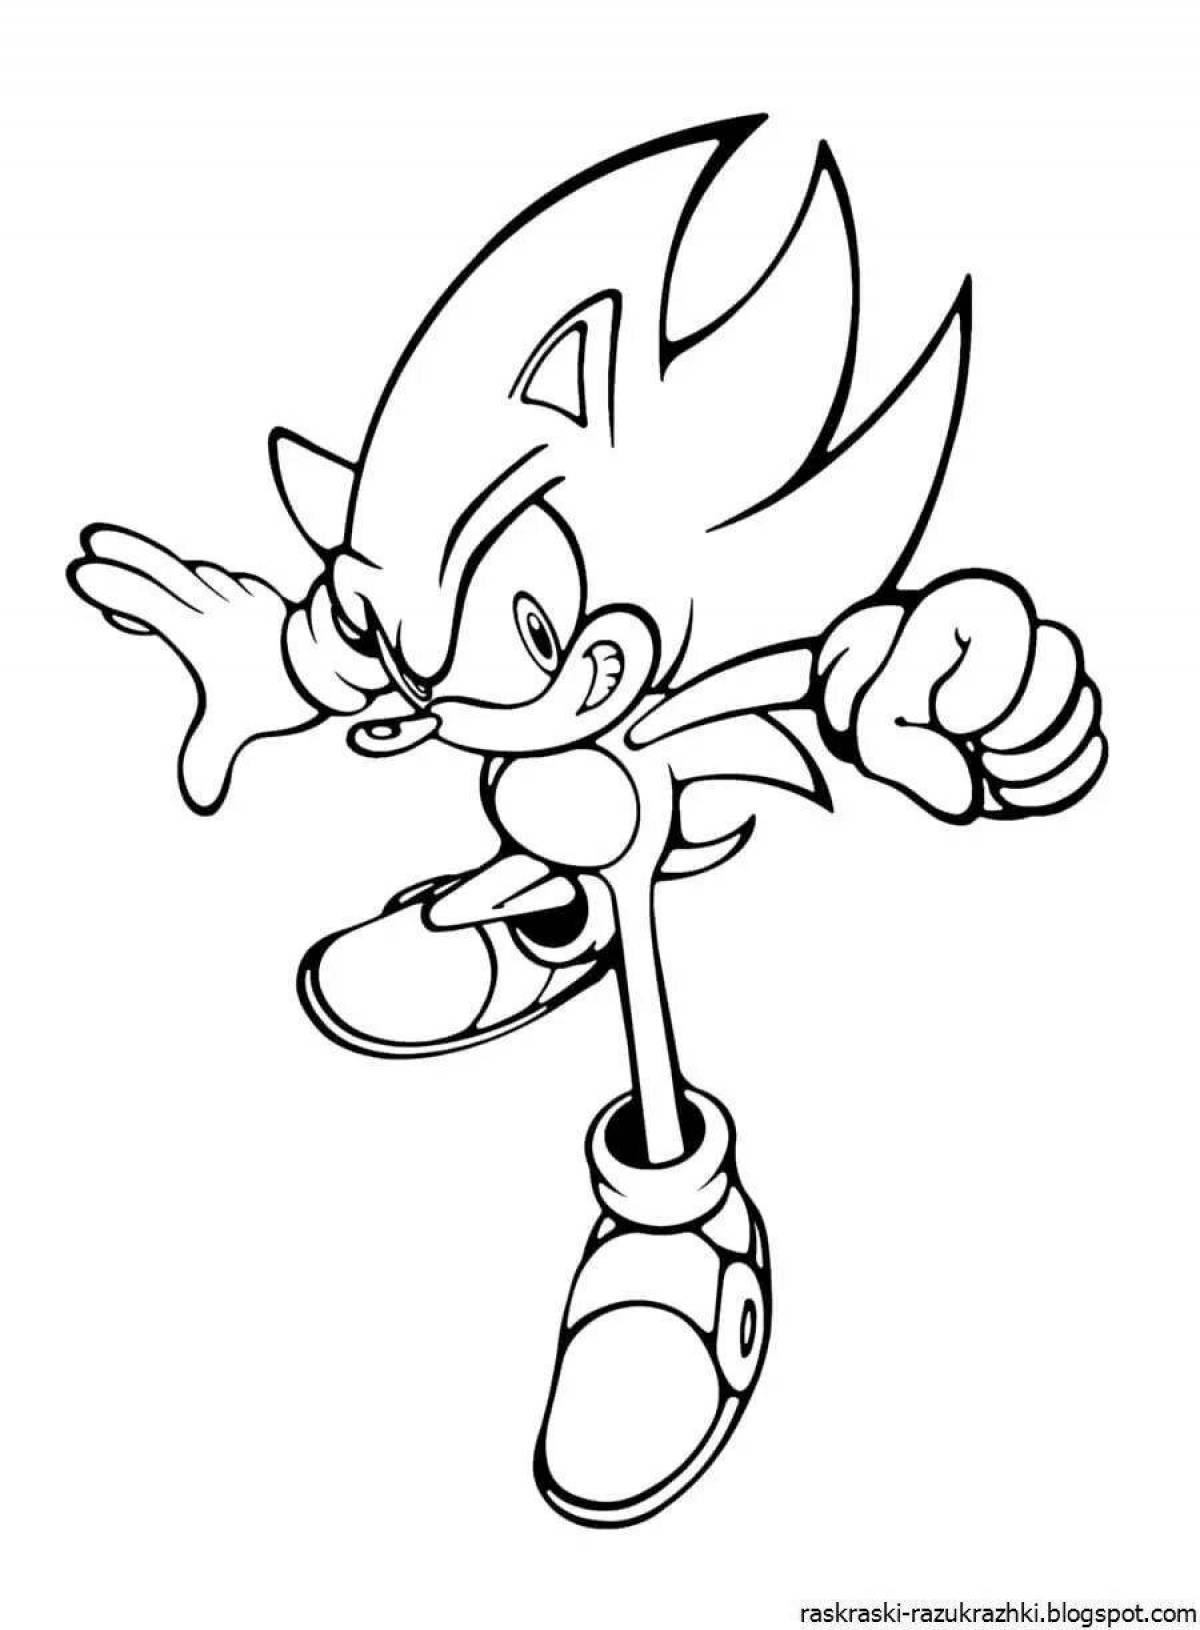 Splendid blue sonic coloring page